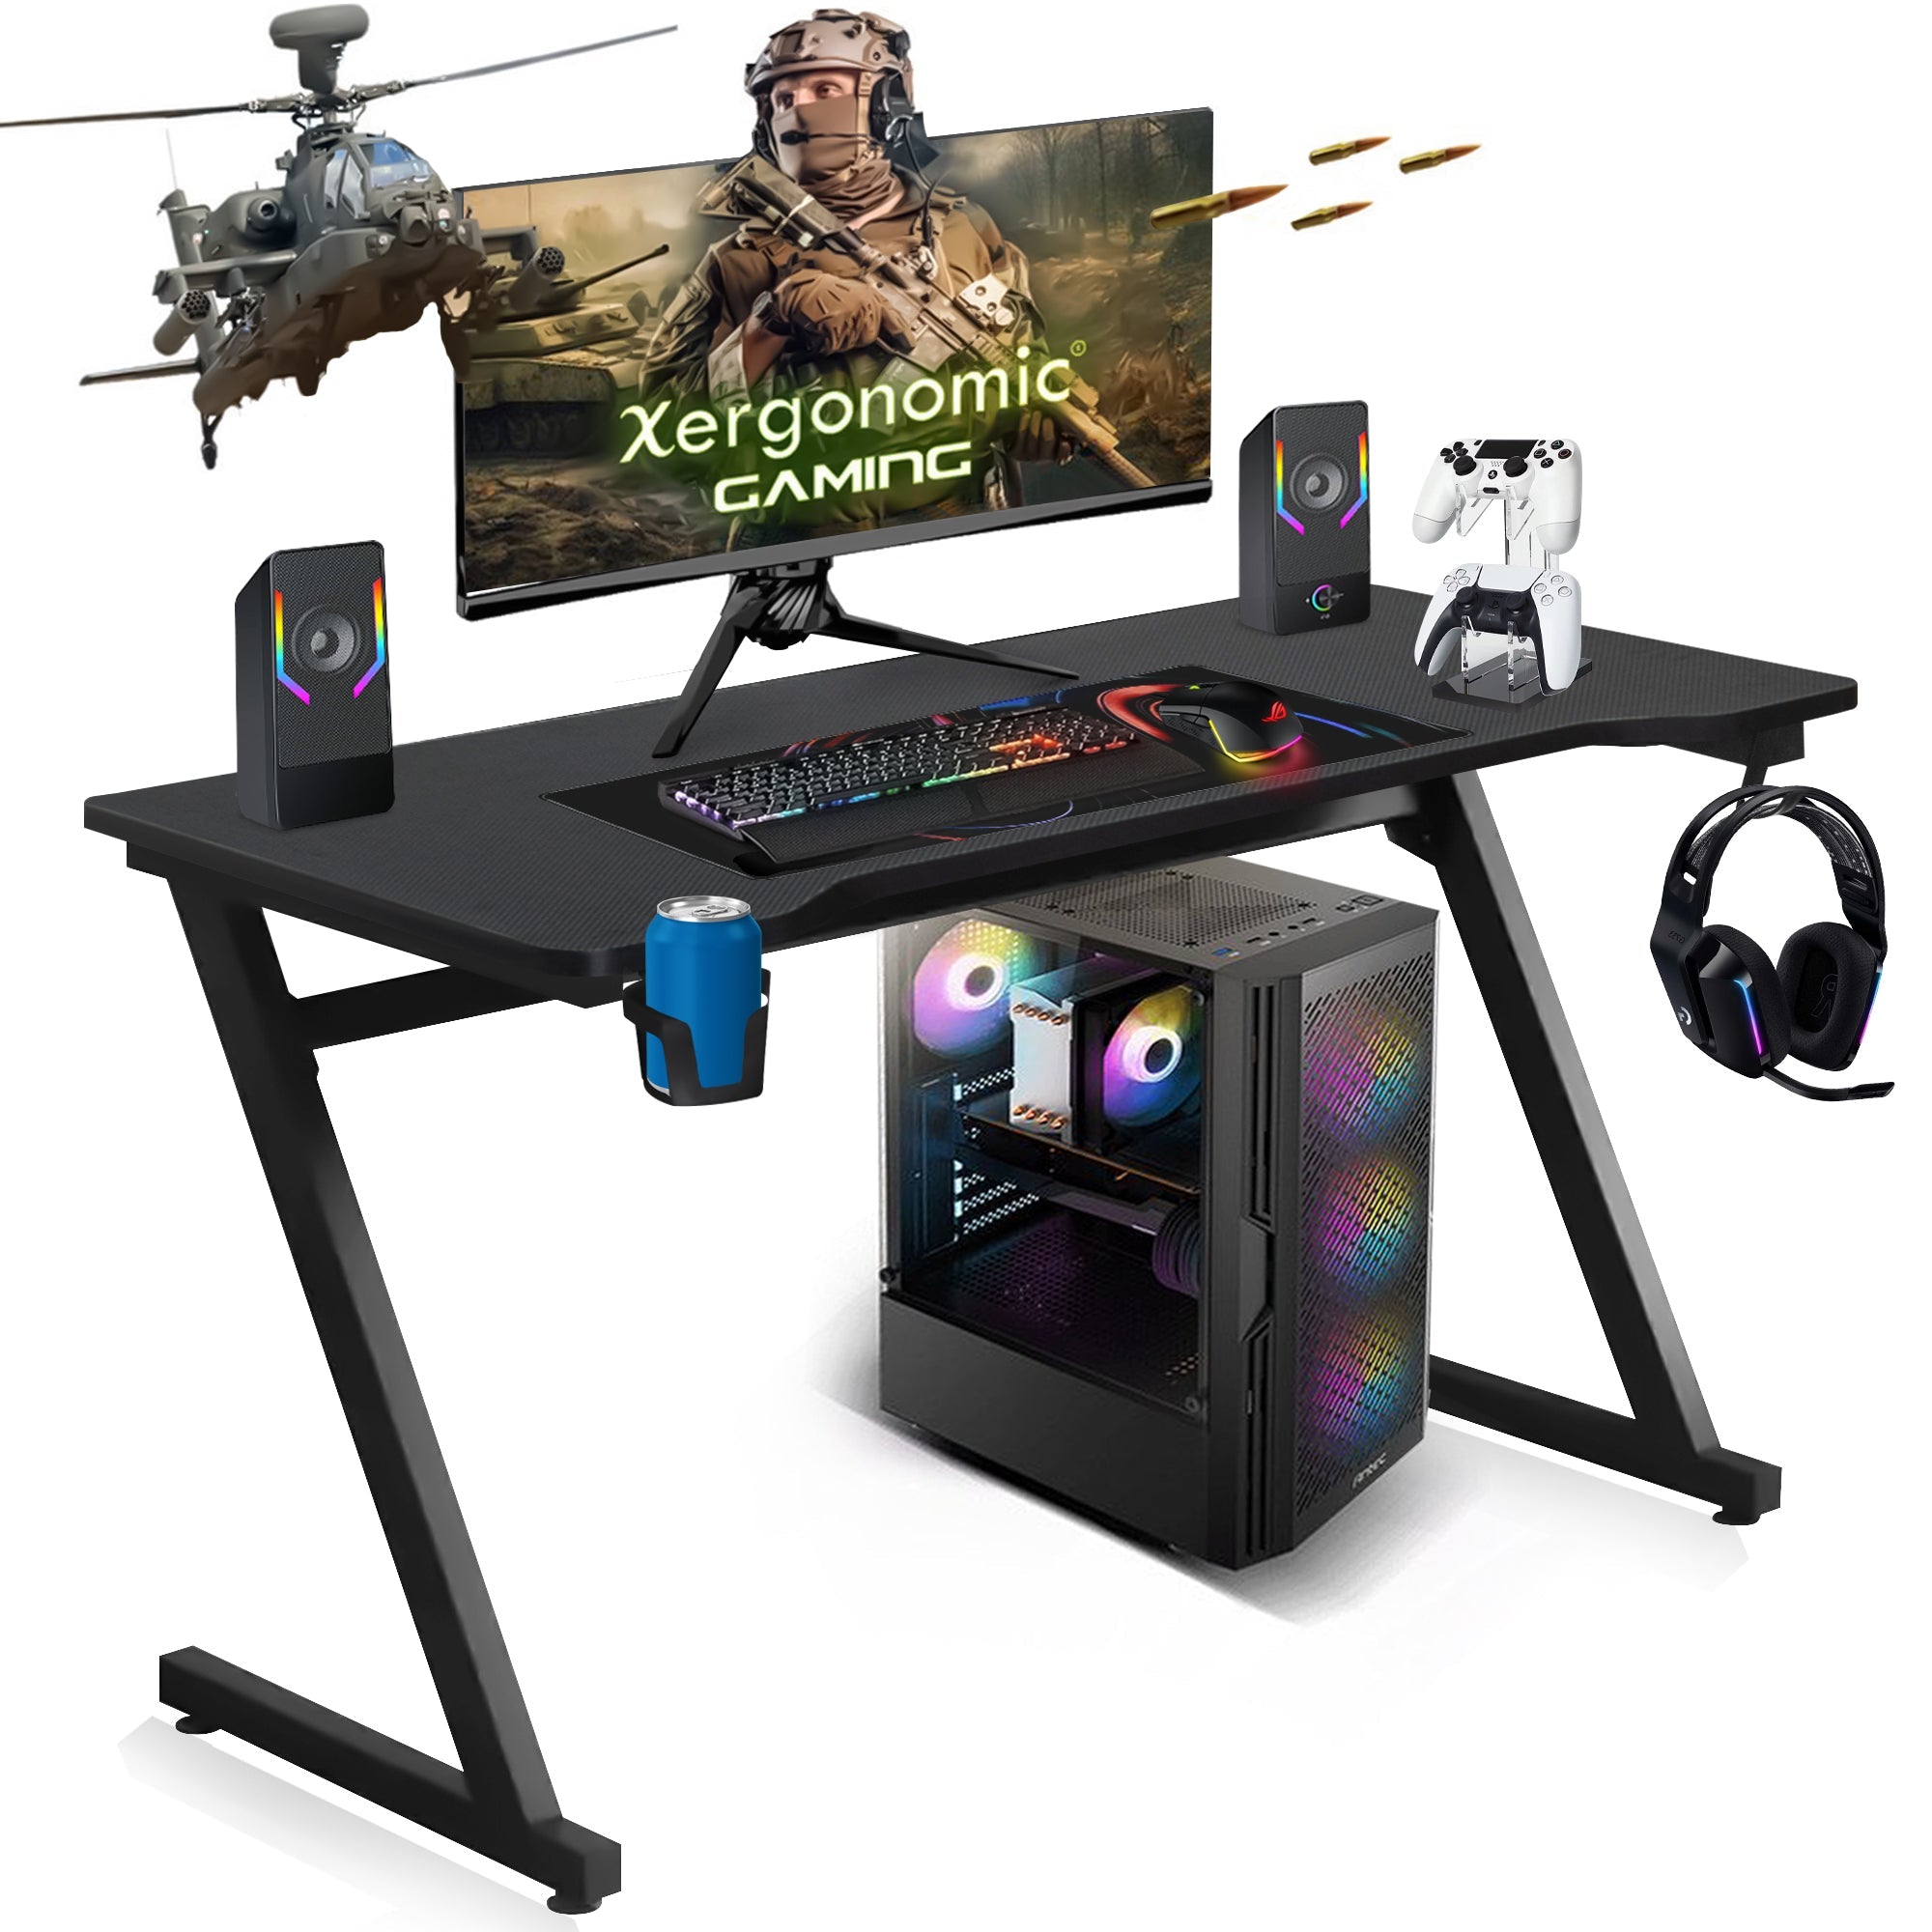 Xergonomic Aurora Xergax Gaming Desk - Carbon fiber look - Computer Table - Incl. cup, headphone holder and cable organizer